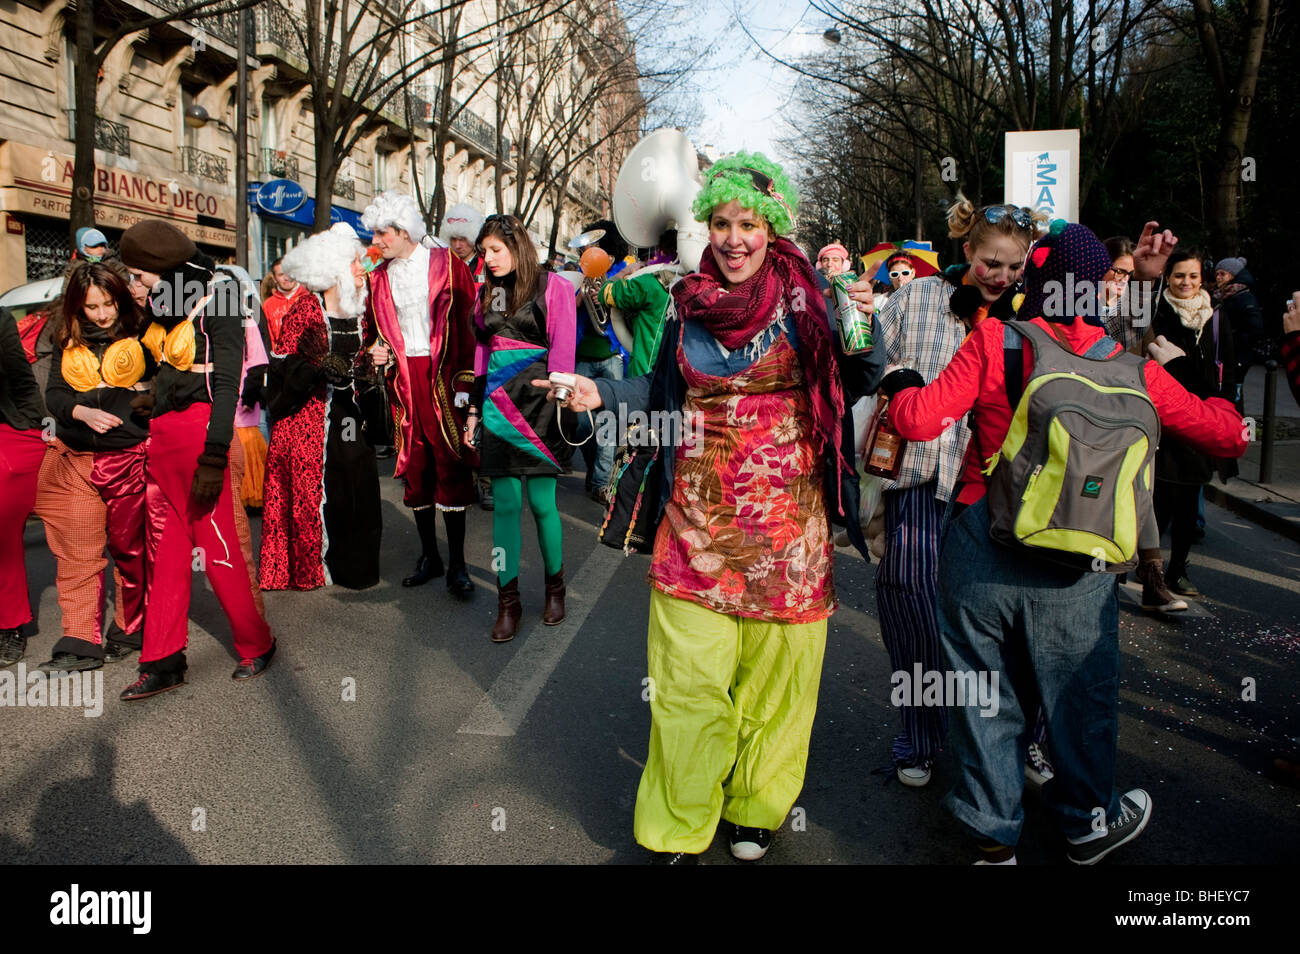 Paris, France, People in Costume Marching in "Carnaval de Paris" Paris Carnival Street Festival, Customs and traditions France Stock Photo